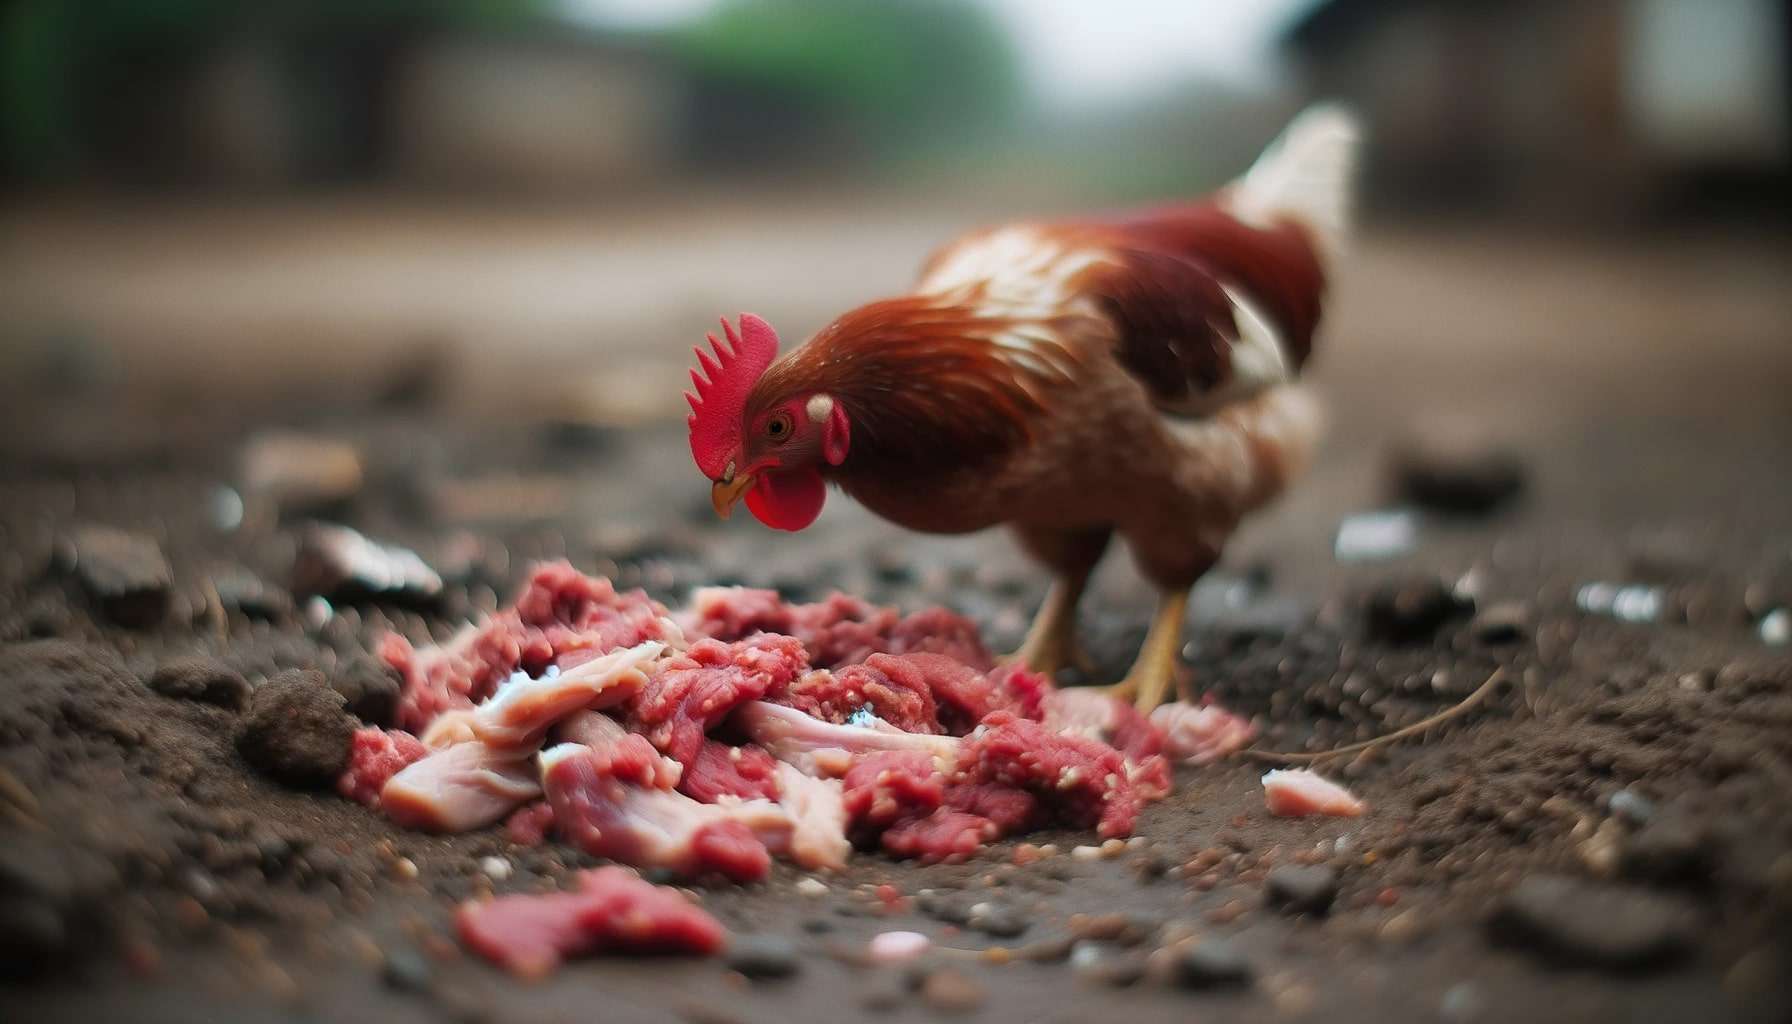 Red-brown chicken eats meat on muddy ground; bright comb and eye in focus.